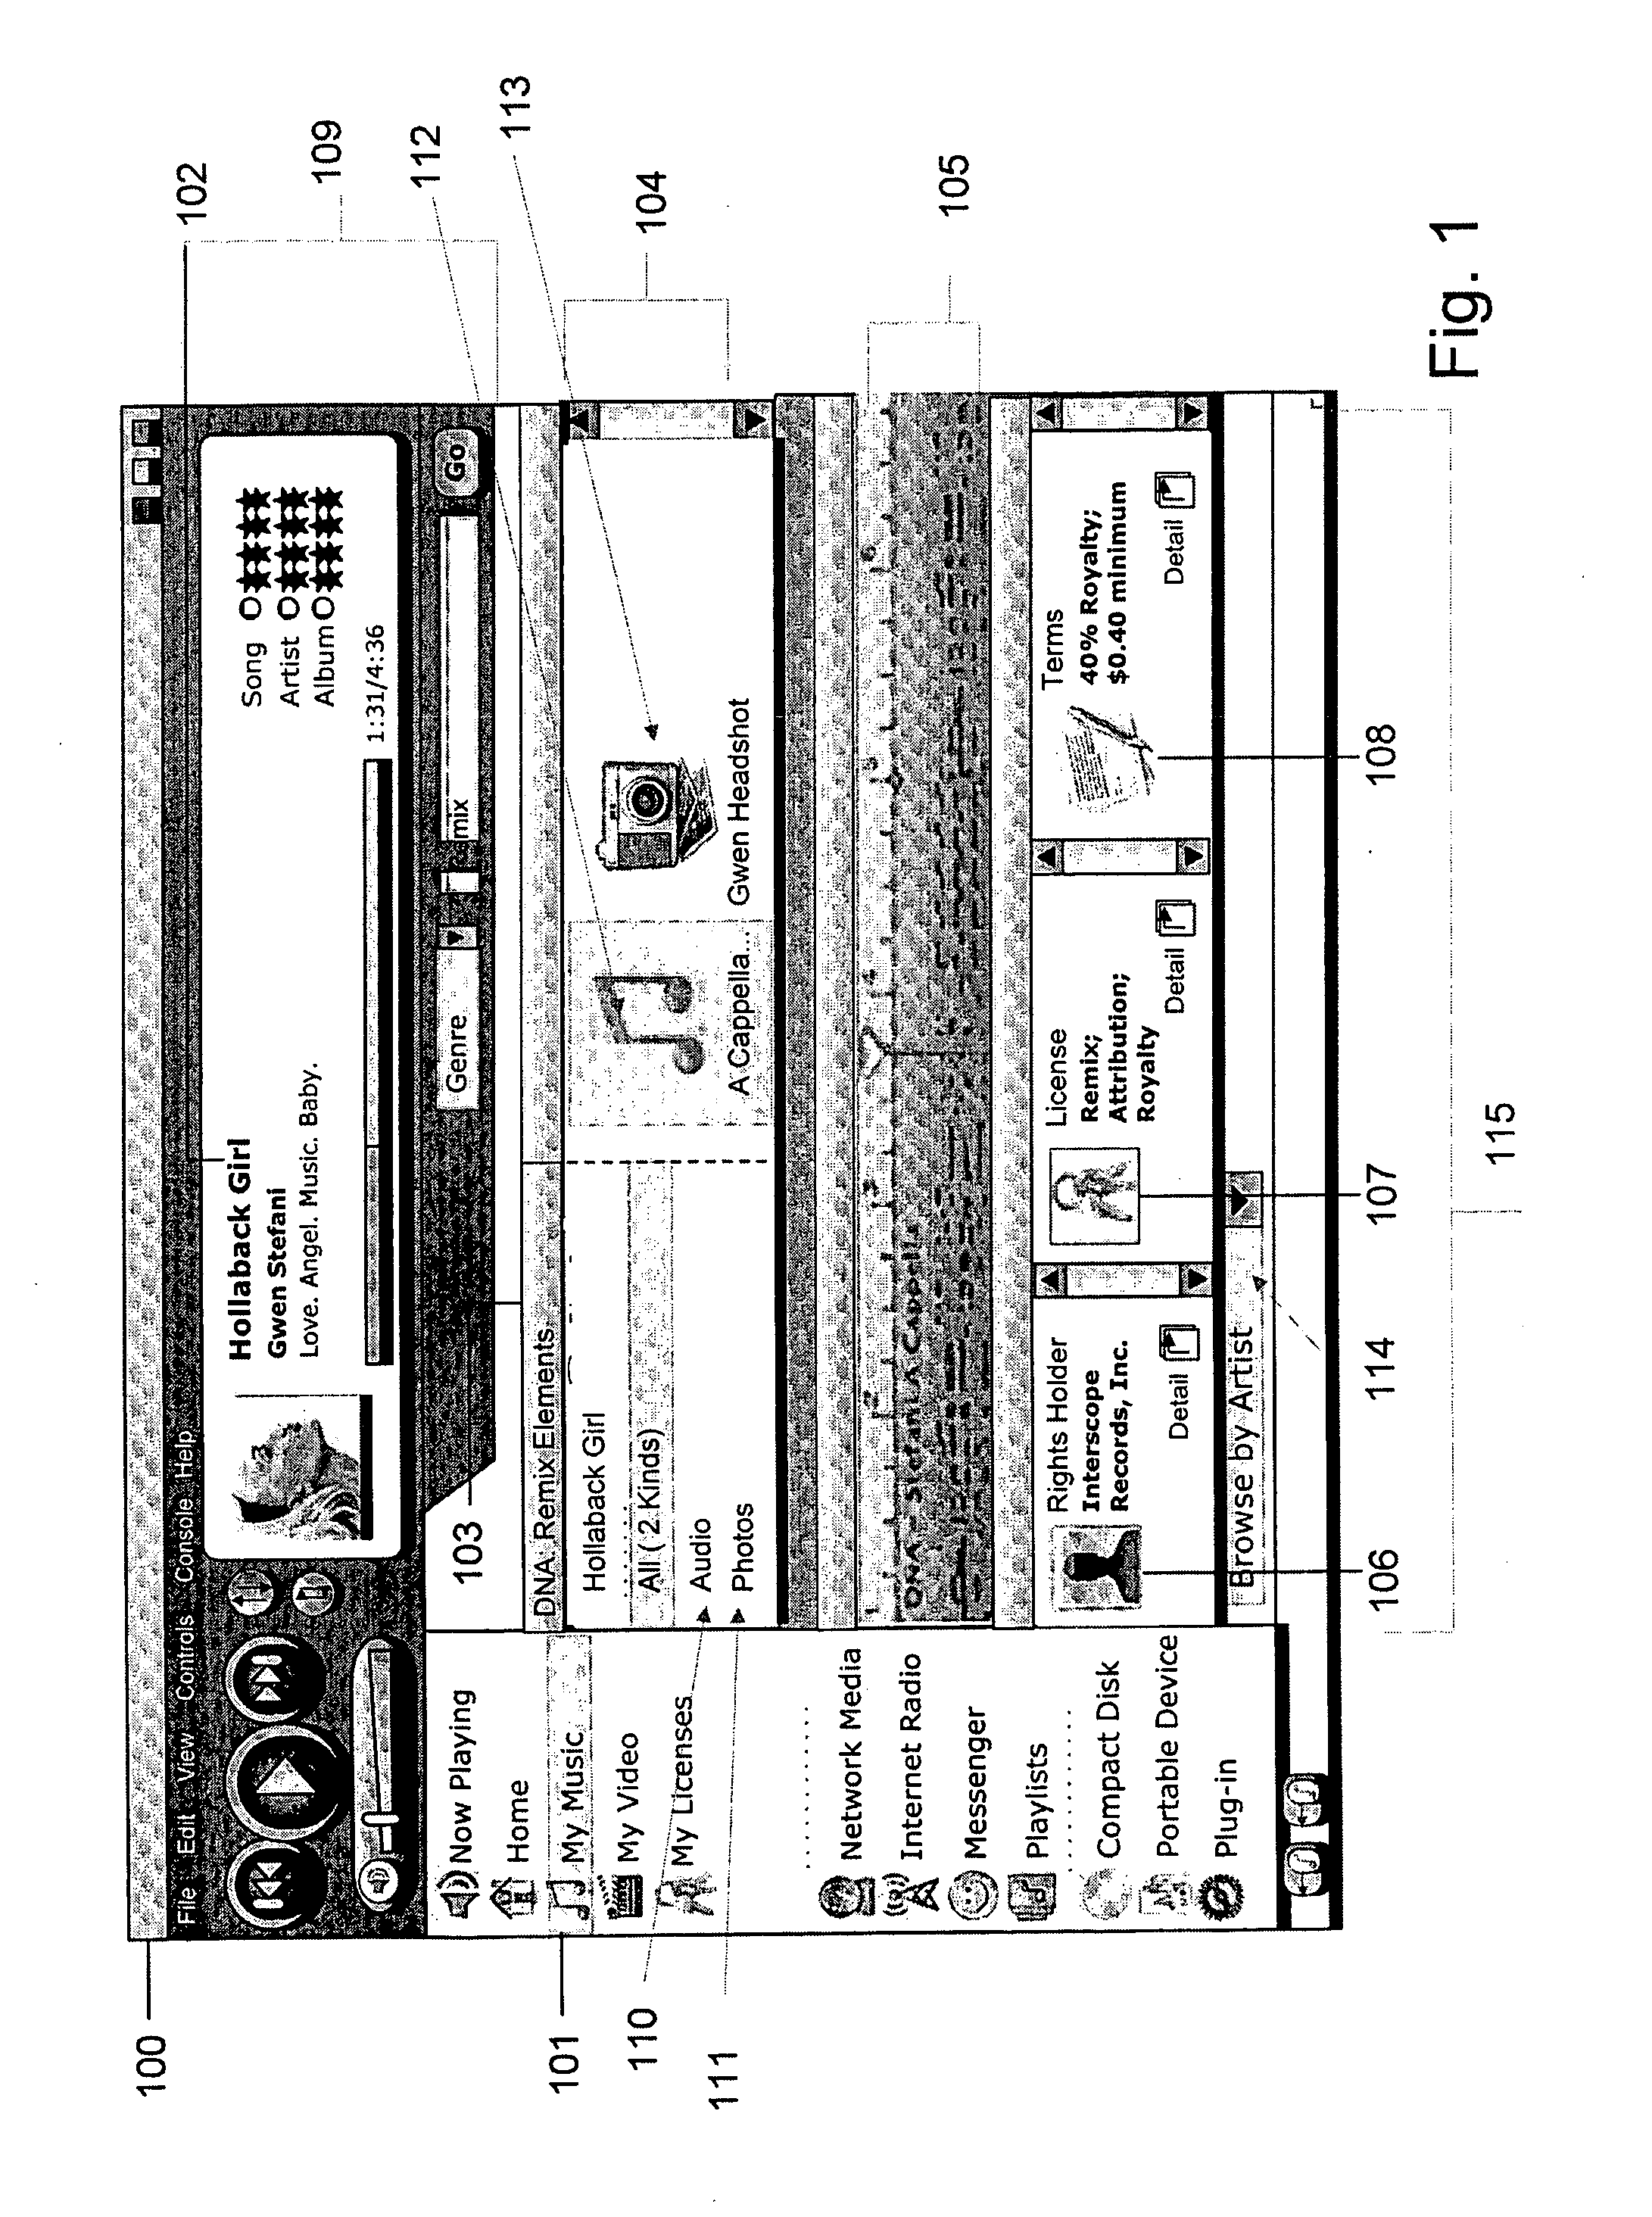 Data container and set of metadata for association with a media item and composite media items